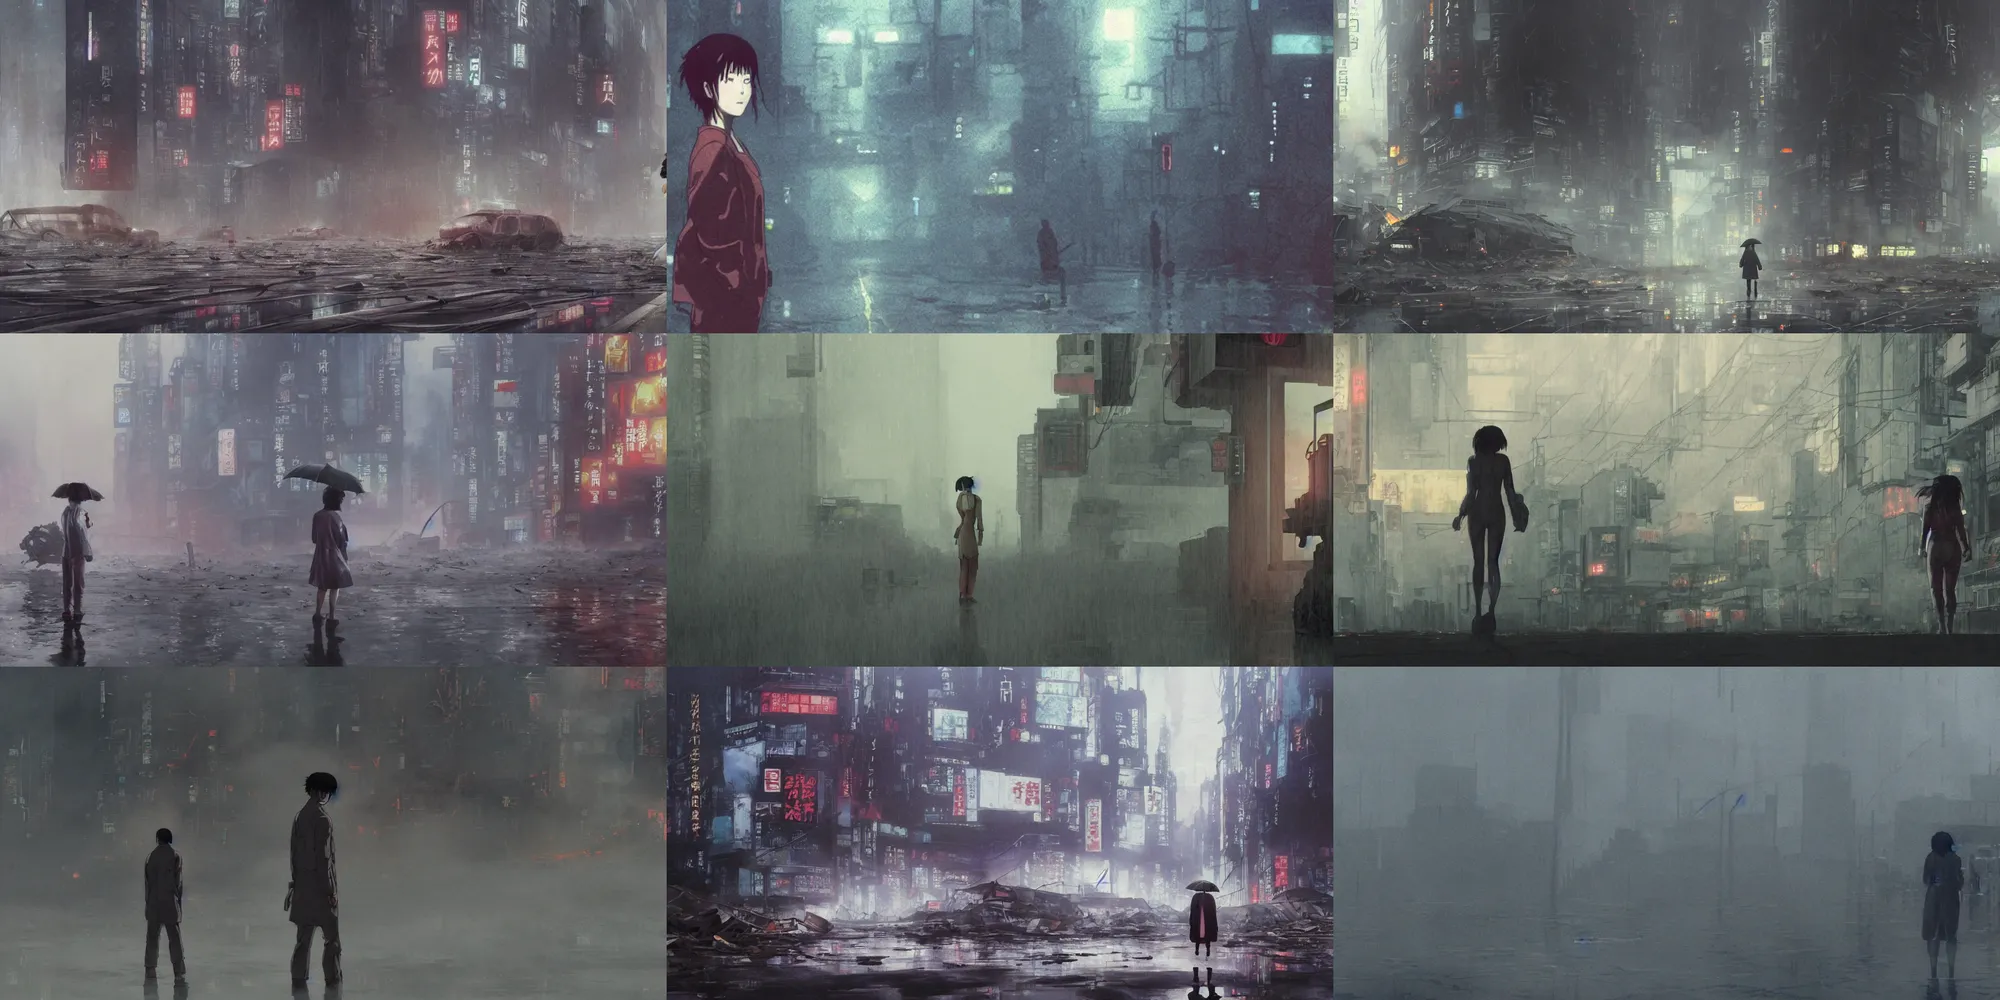 Prompt: incredible wide screenshot, ultrawide, simple water color, paper texture, katsuhiro otomo ghost in the shell, mamoru oshii, low camera, backlit girl in raincoat, wet dark road, parasol in deserted junk pile, giant robot foot, earthquake destruction, reflection, thick fog, smoke, destroyed robots, blazing fire, burning bus crash inferno, lens flare